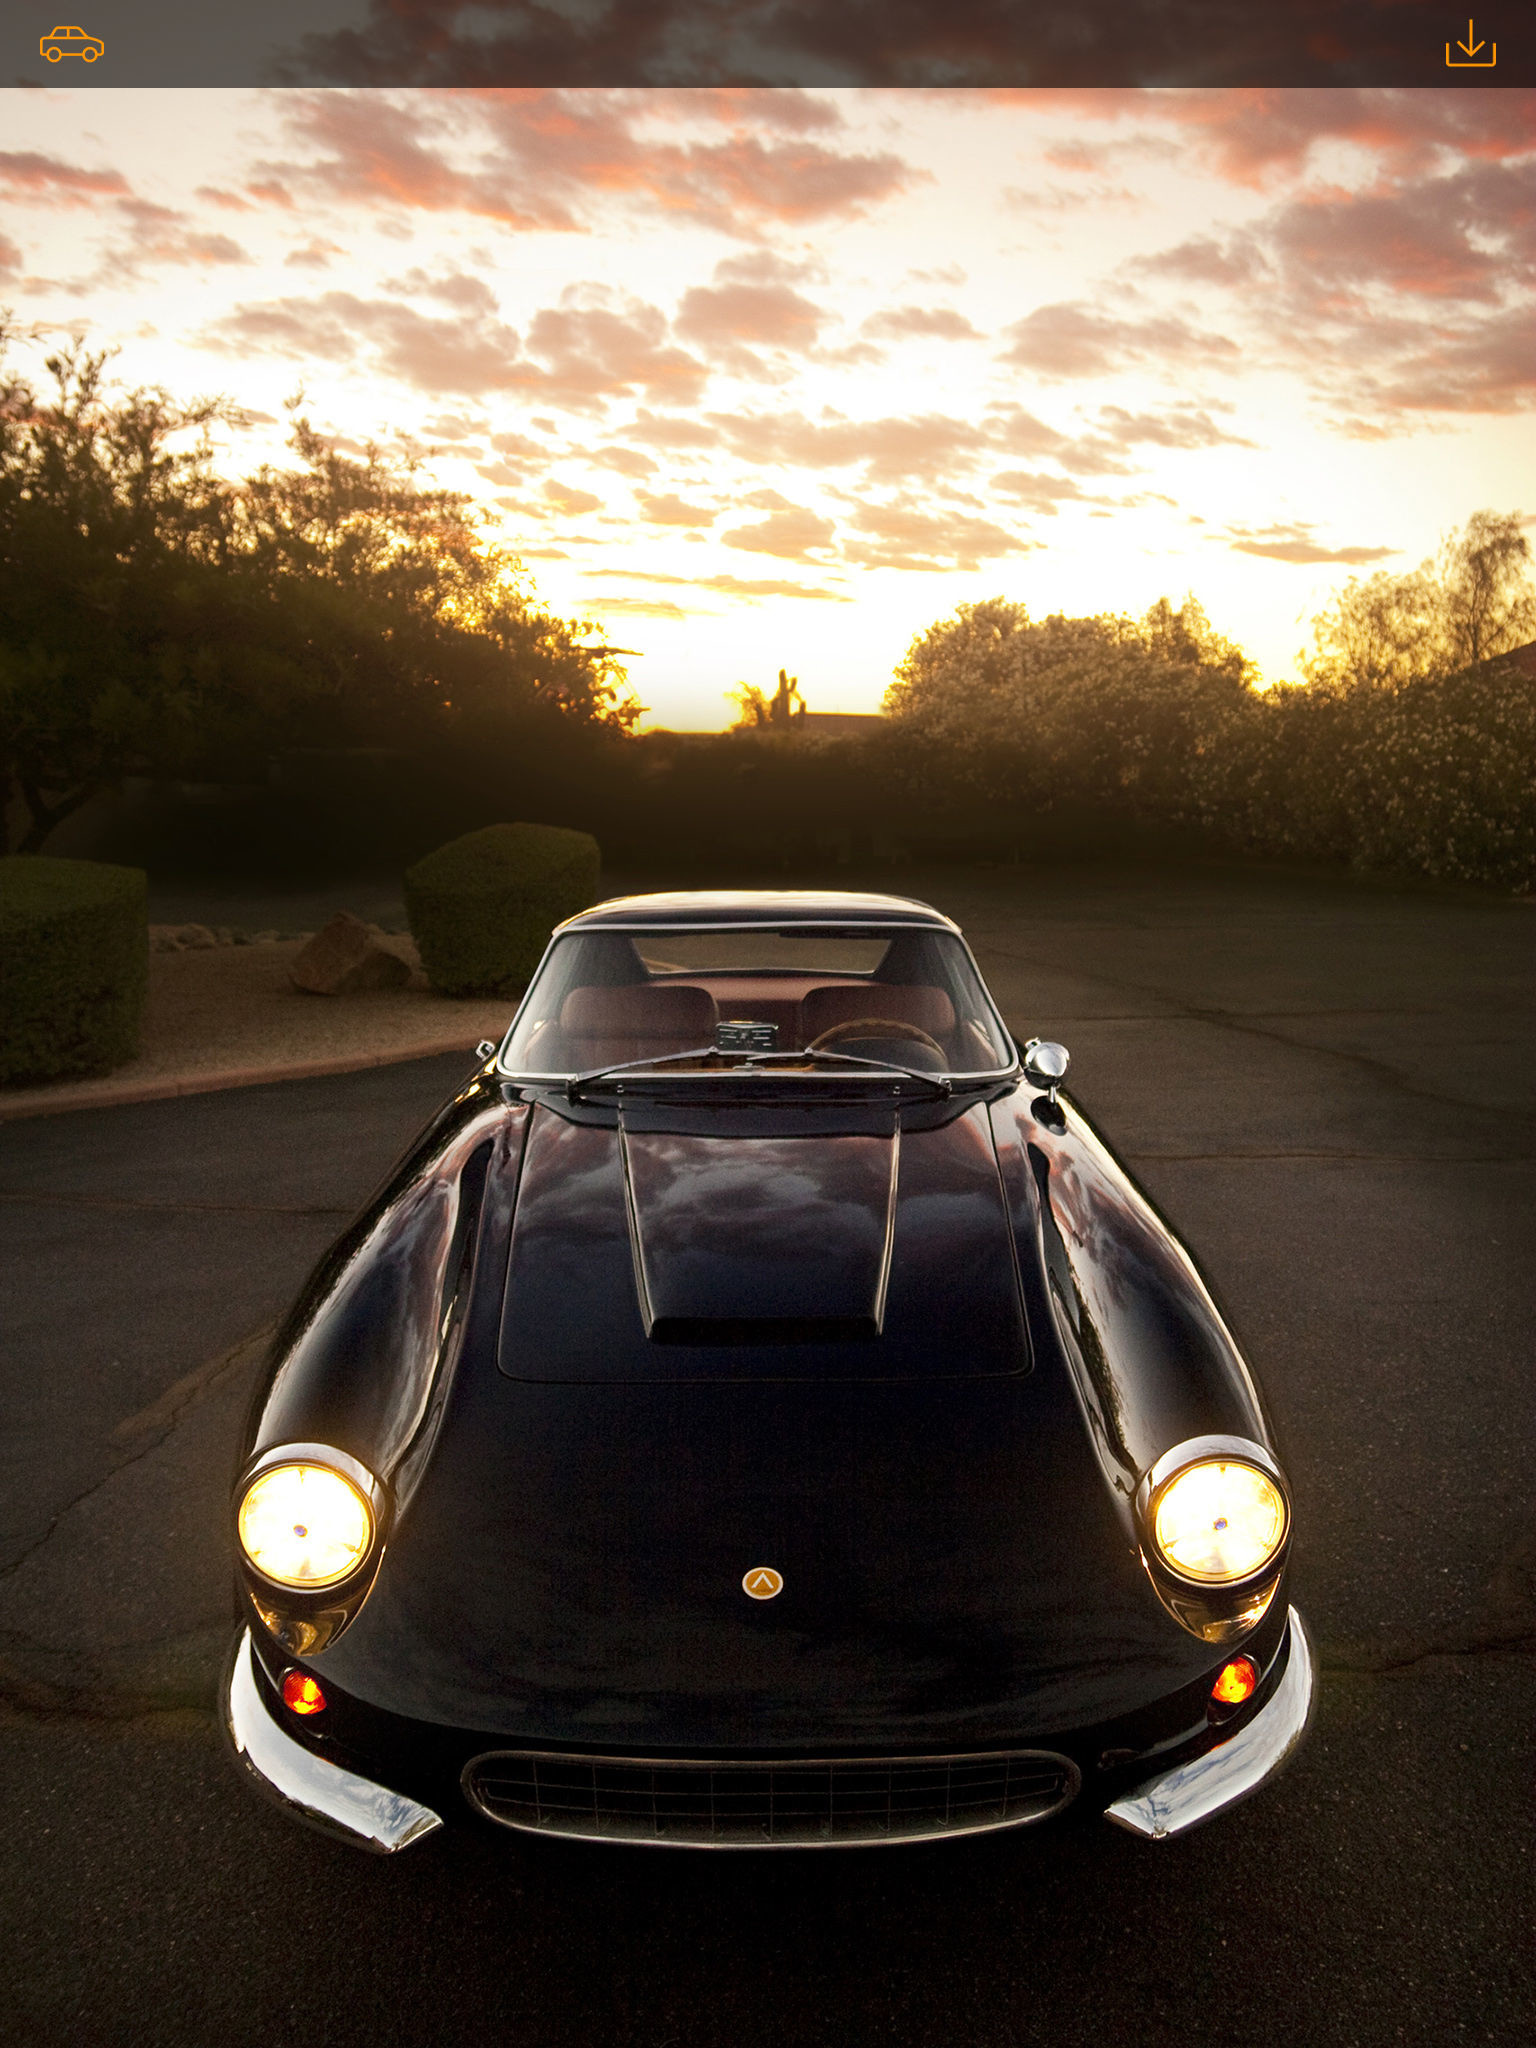 1536x2048 App-Beschreibung. Cool wallpapers with old classic cars for your iOS ...